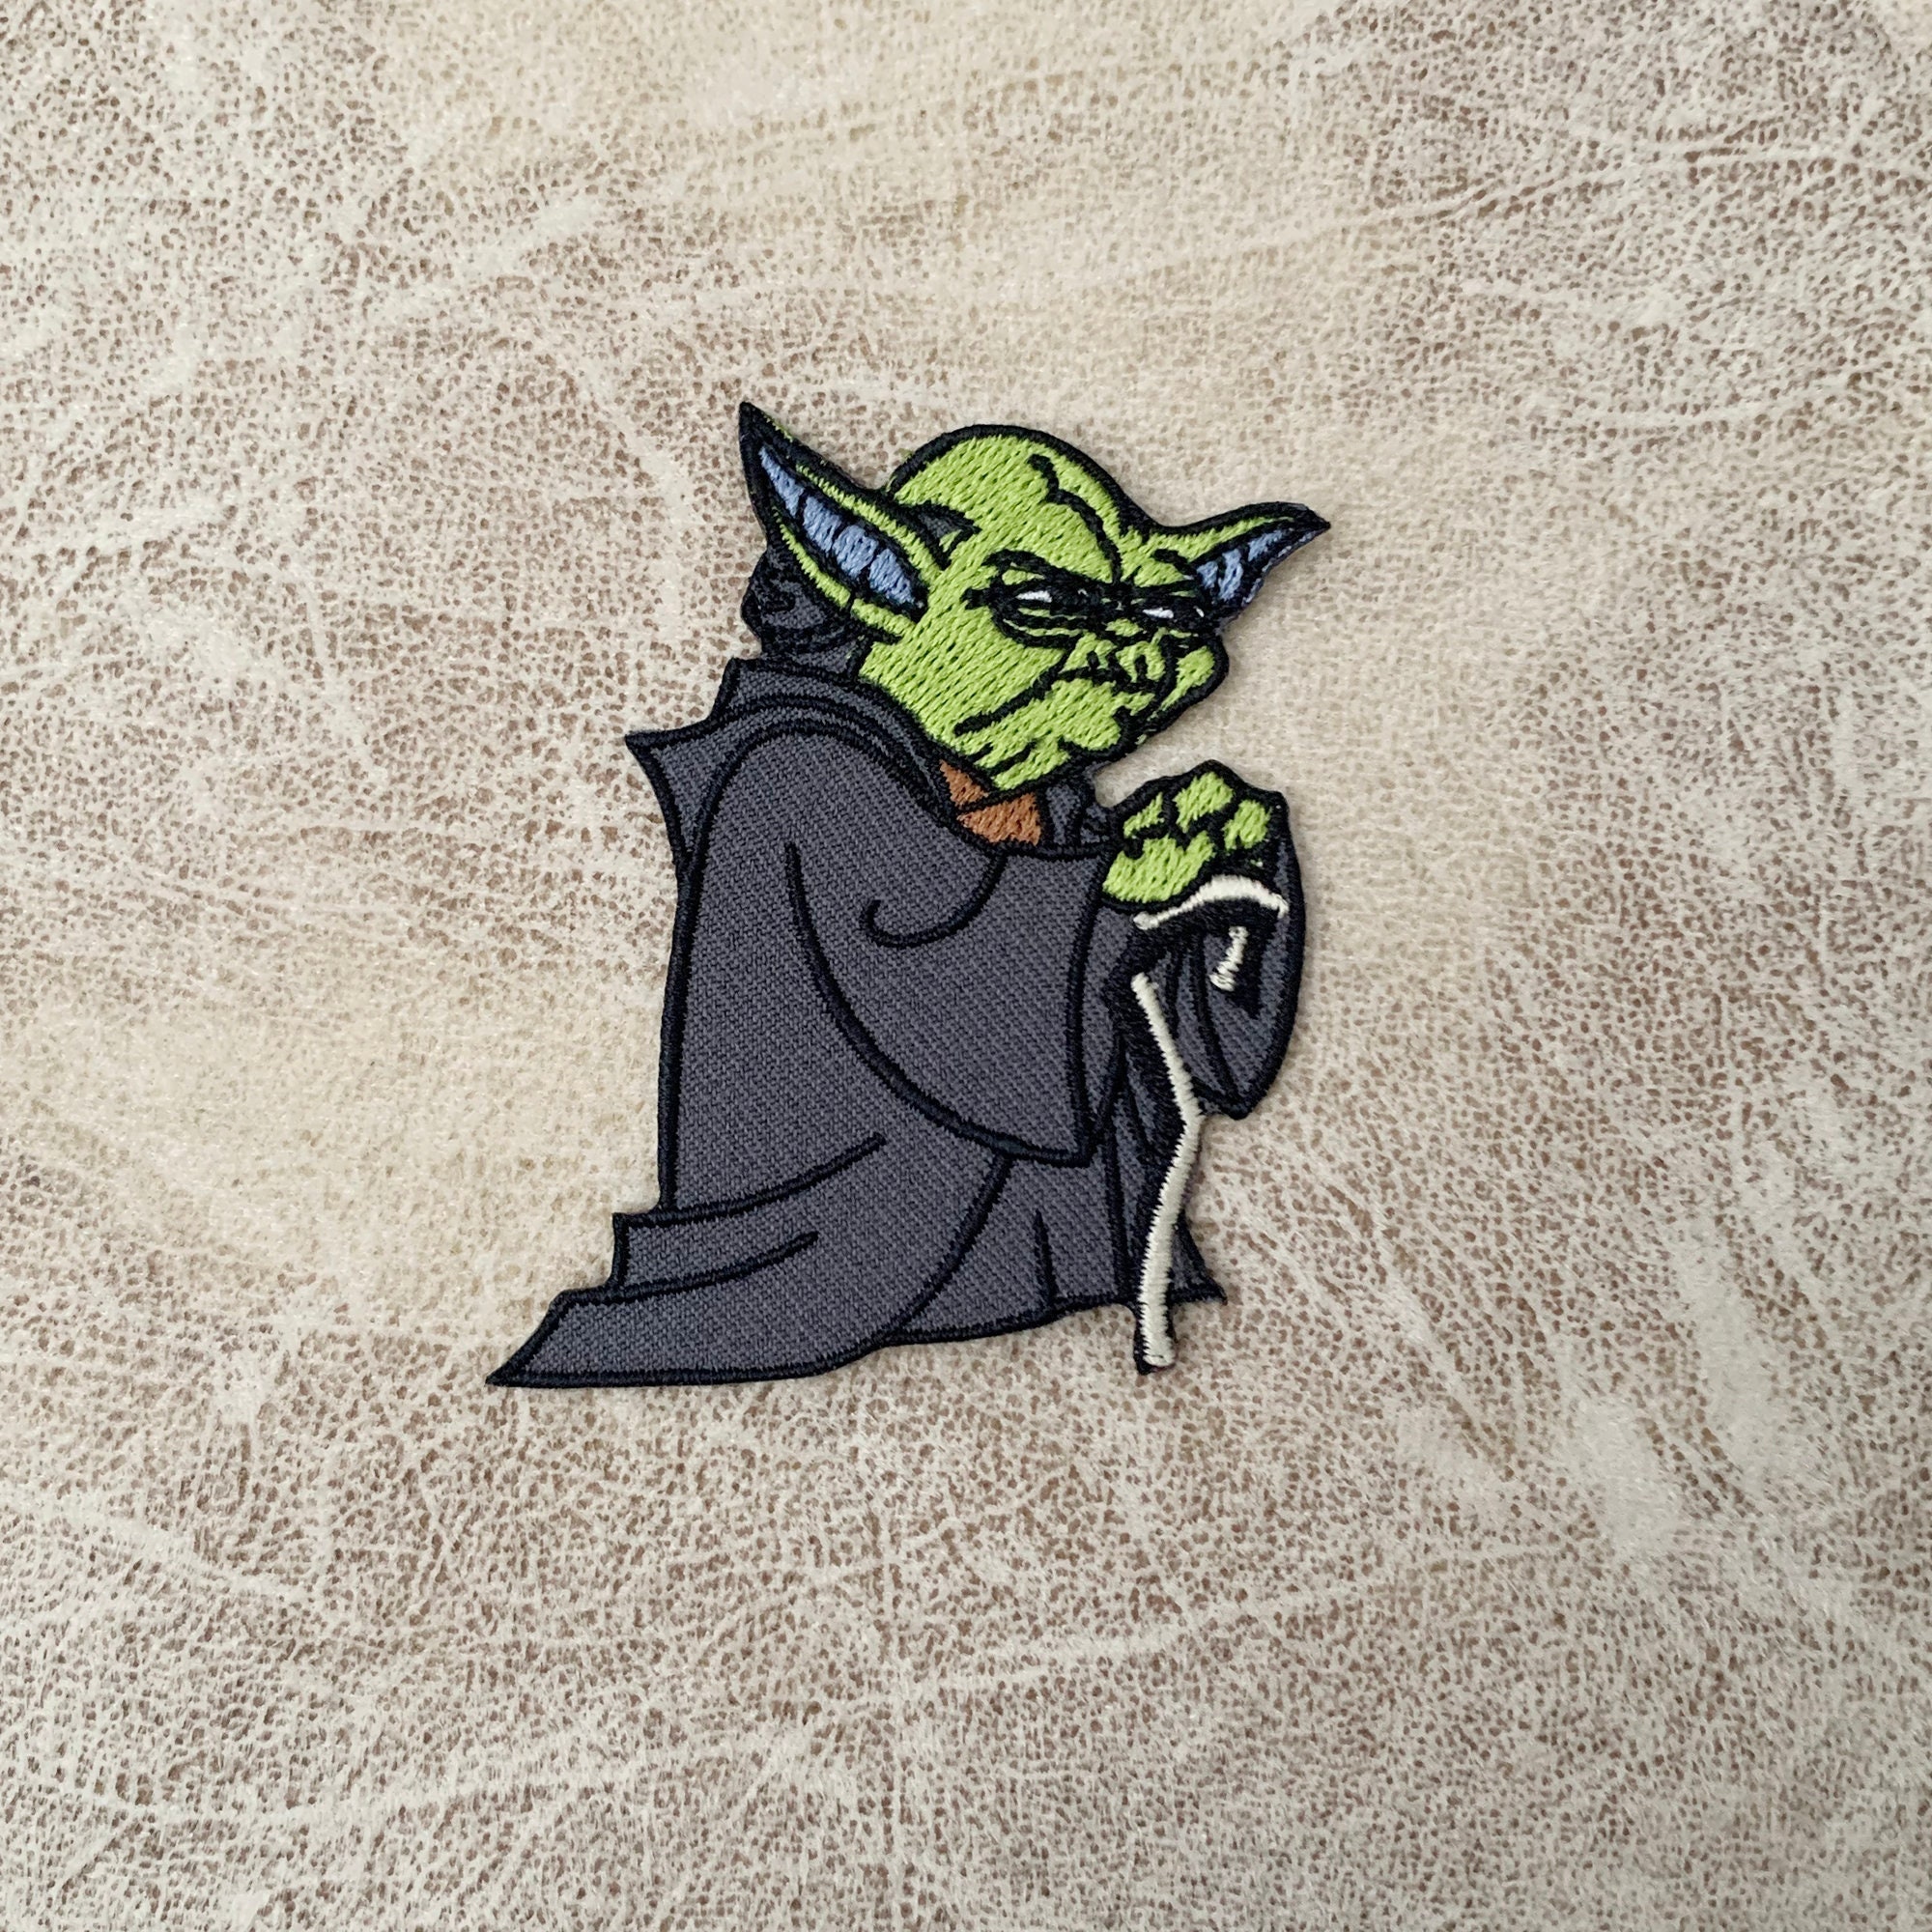 Star Wars Inspired Embroidered Patch 